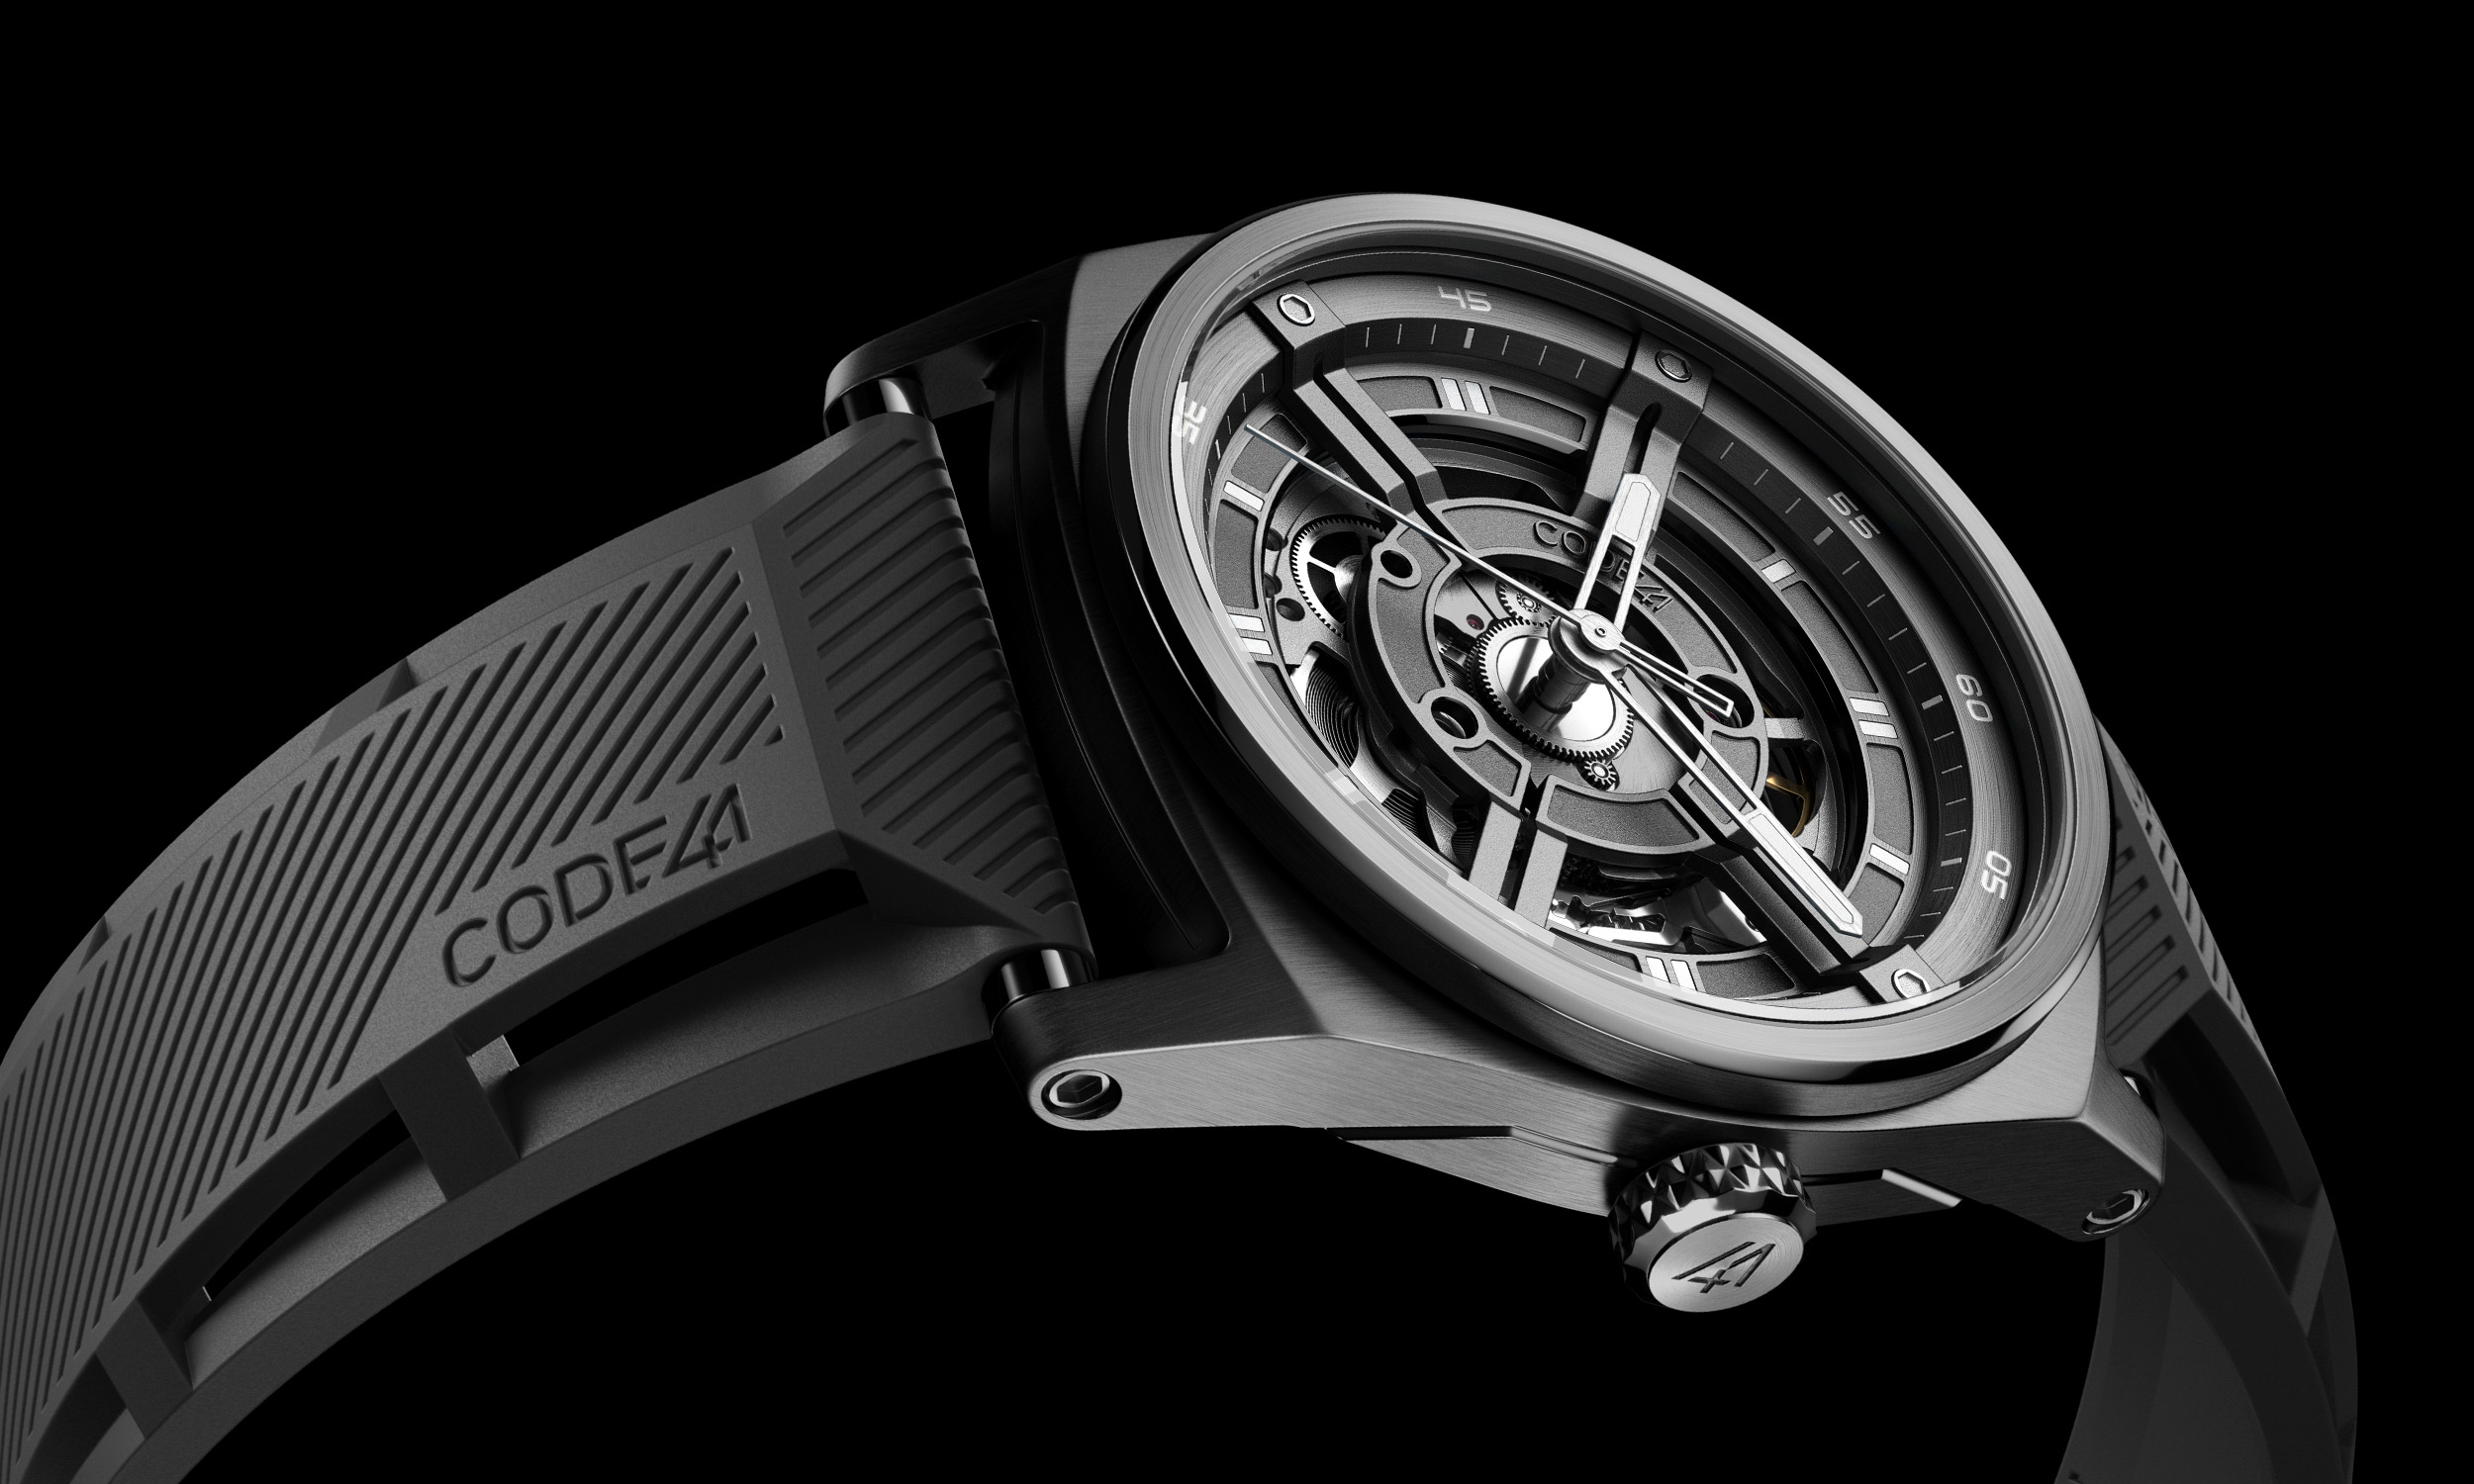 Code41 Anomaly-T4 “Creator Edition” – Professional Watches